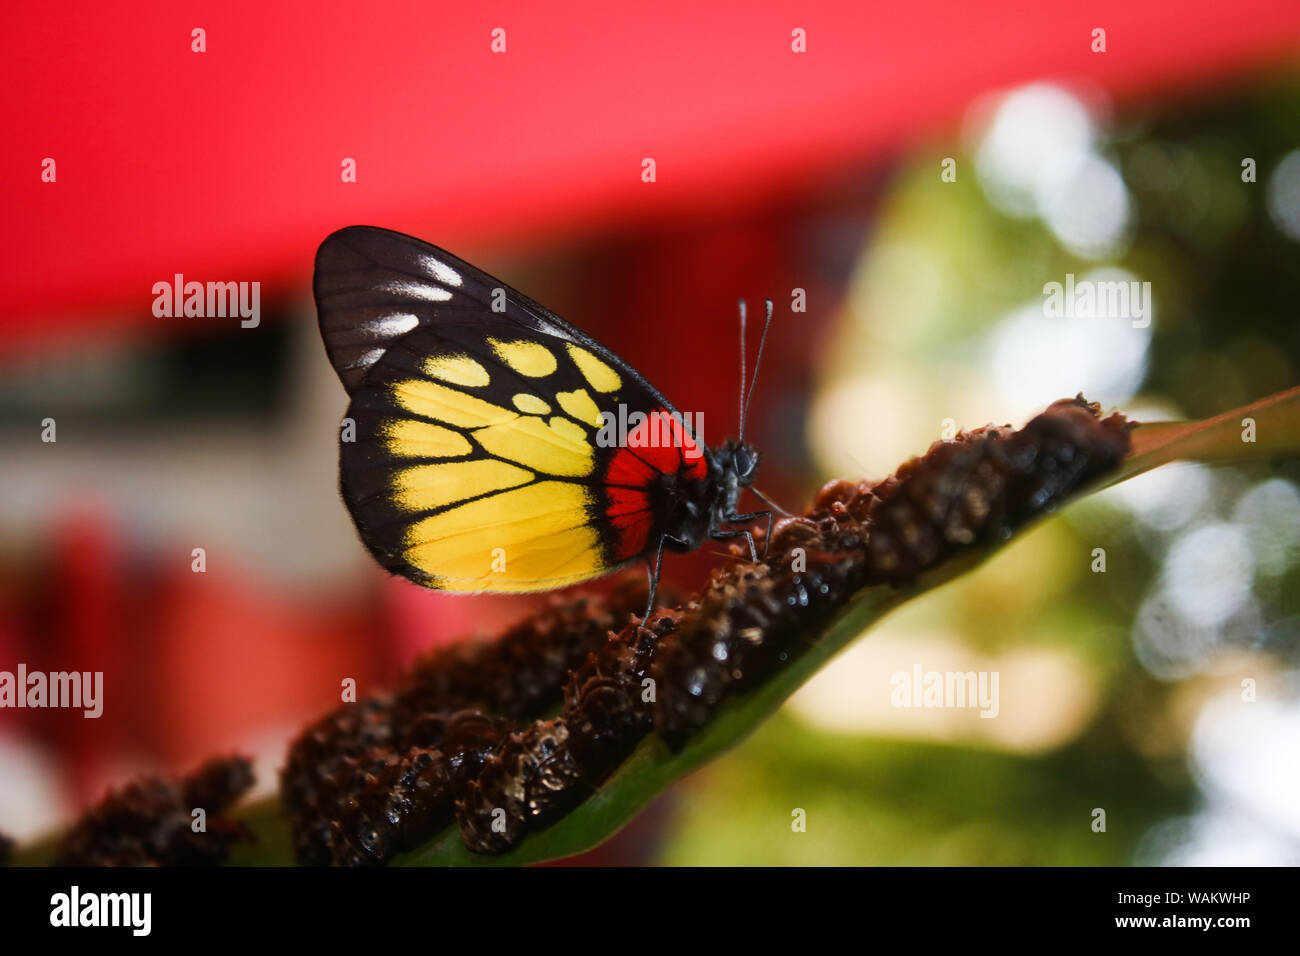 A monarch butterfly Stock Photo